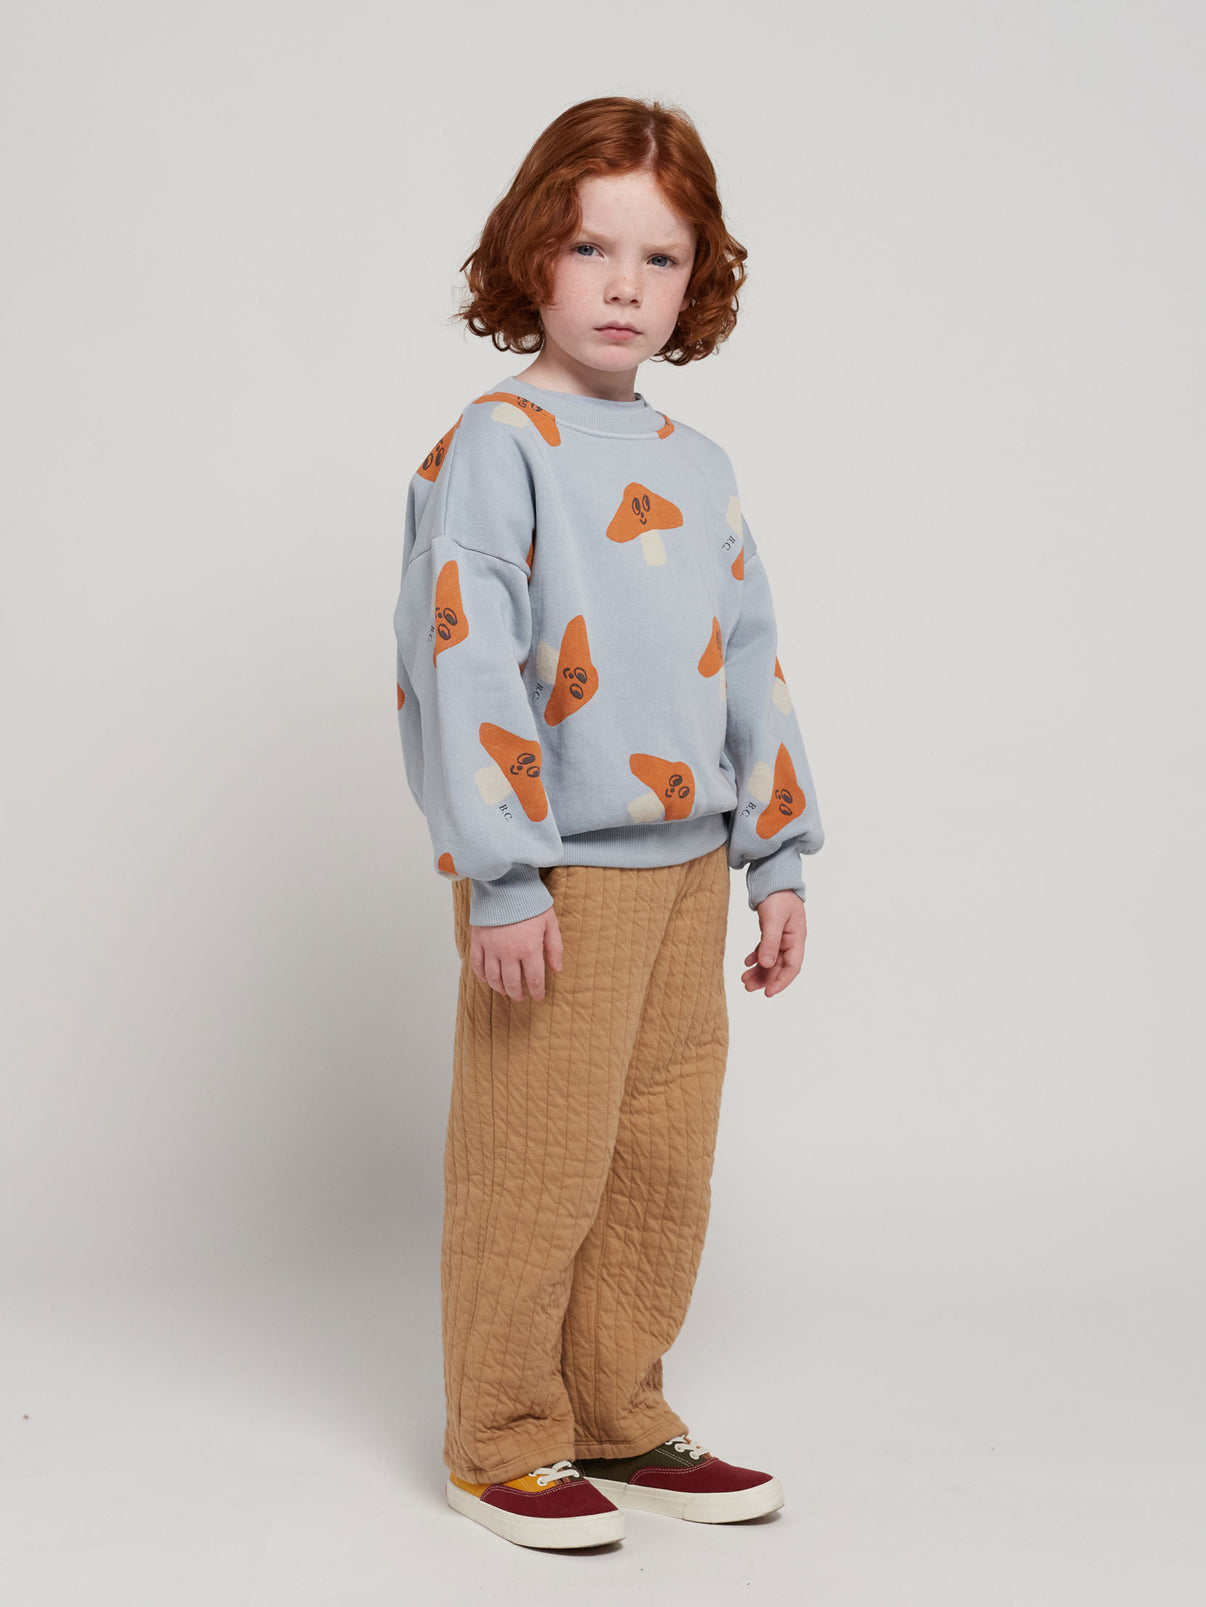 Bobo Choses Multicolor Mouse Tee. 100% organic cotton white long sleeve t-shirt. Designed with long sleeves and round neck. It has a loose fit. Made ethically and sustainably by Bobo Choses.